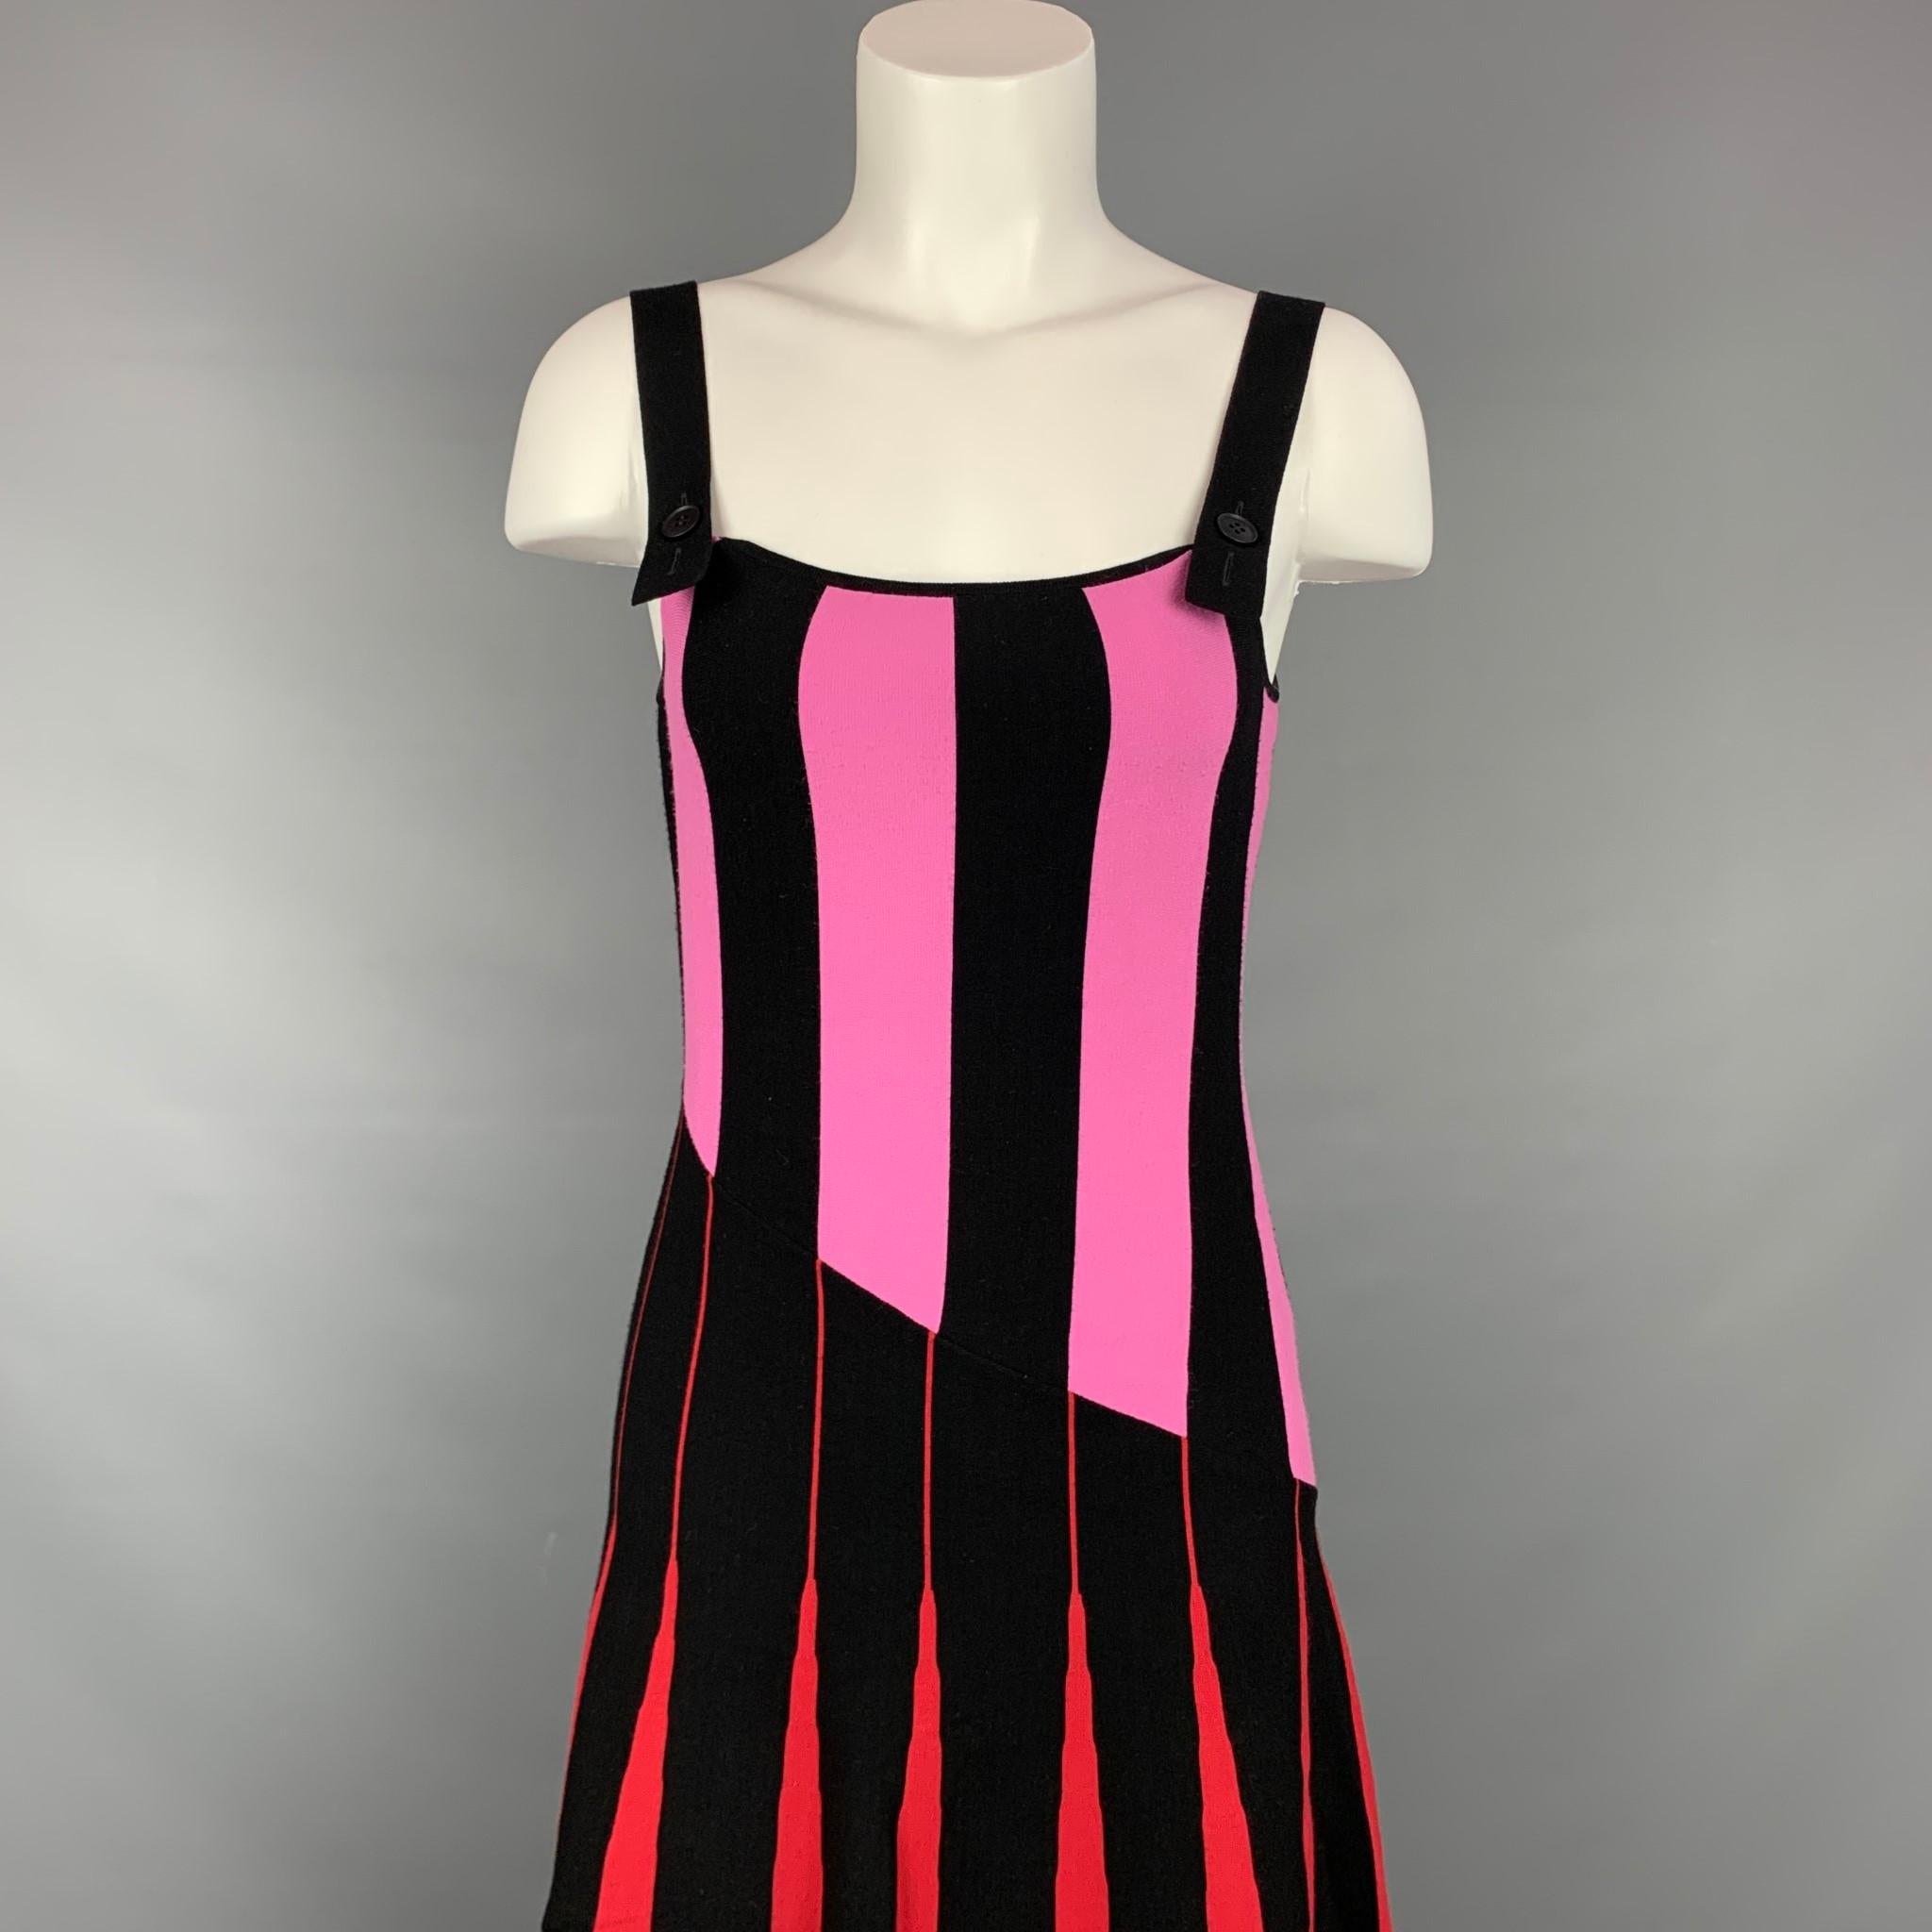 TOMAS MAIER dress comes in a black & red stripe viscose / polyester featuring buttoned straps and a-line style. Made in Italy.

Very Good Pre-Owned Condition.
Marked: 2

Measurements:

Bust: 30 in.
Waist: 28 in.
Hip: 36 in.
Length: 36 in. 